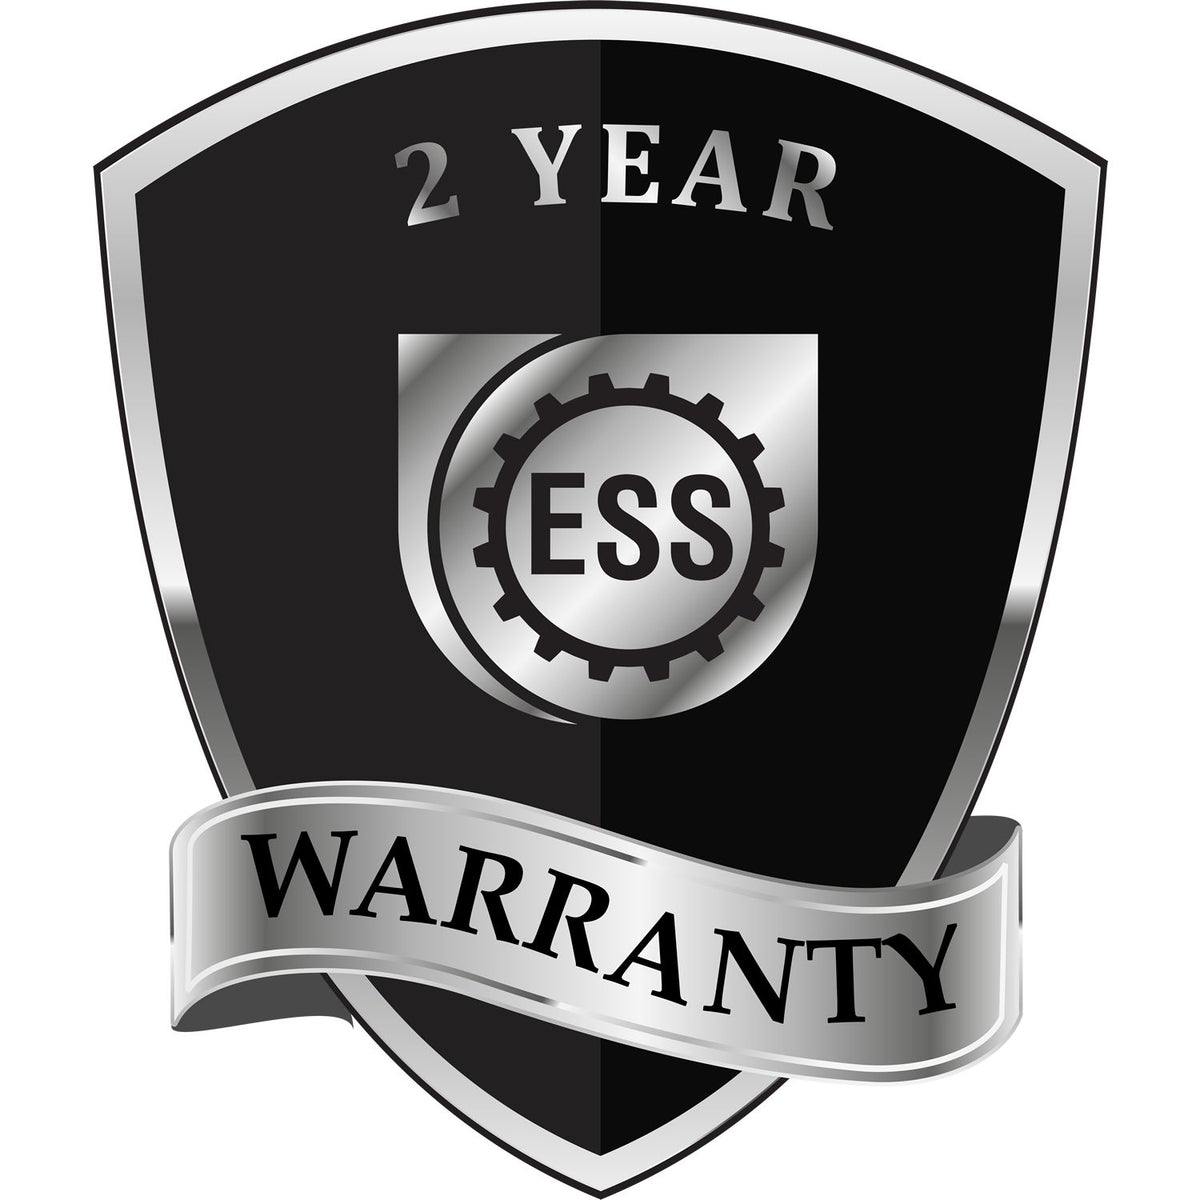 A black and silver badge or emblem showing warranty information for the Georgia Geologist Desk Seal